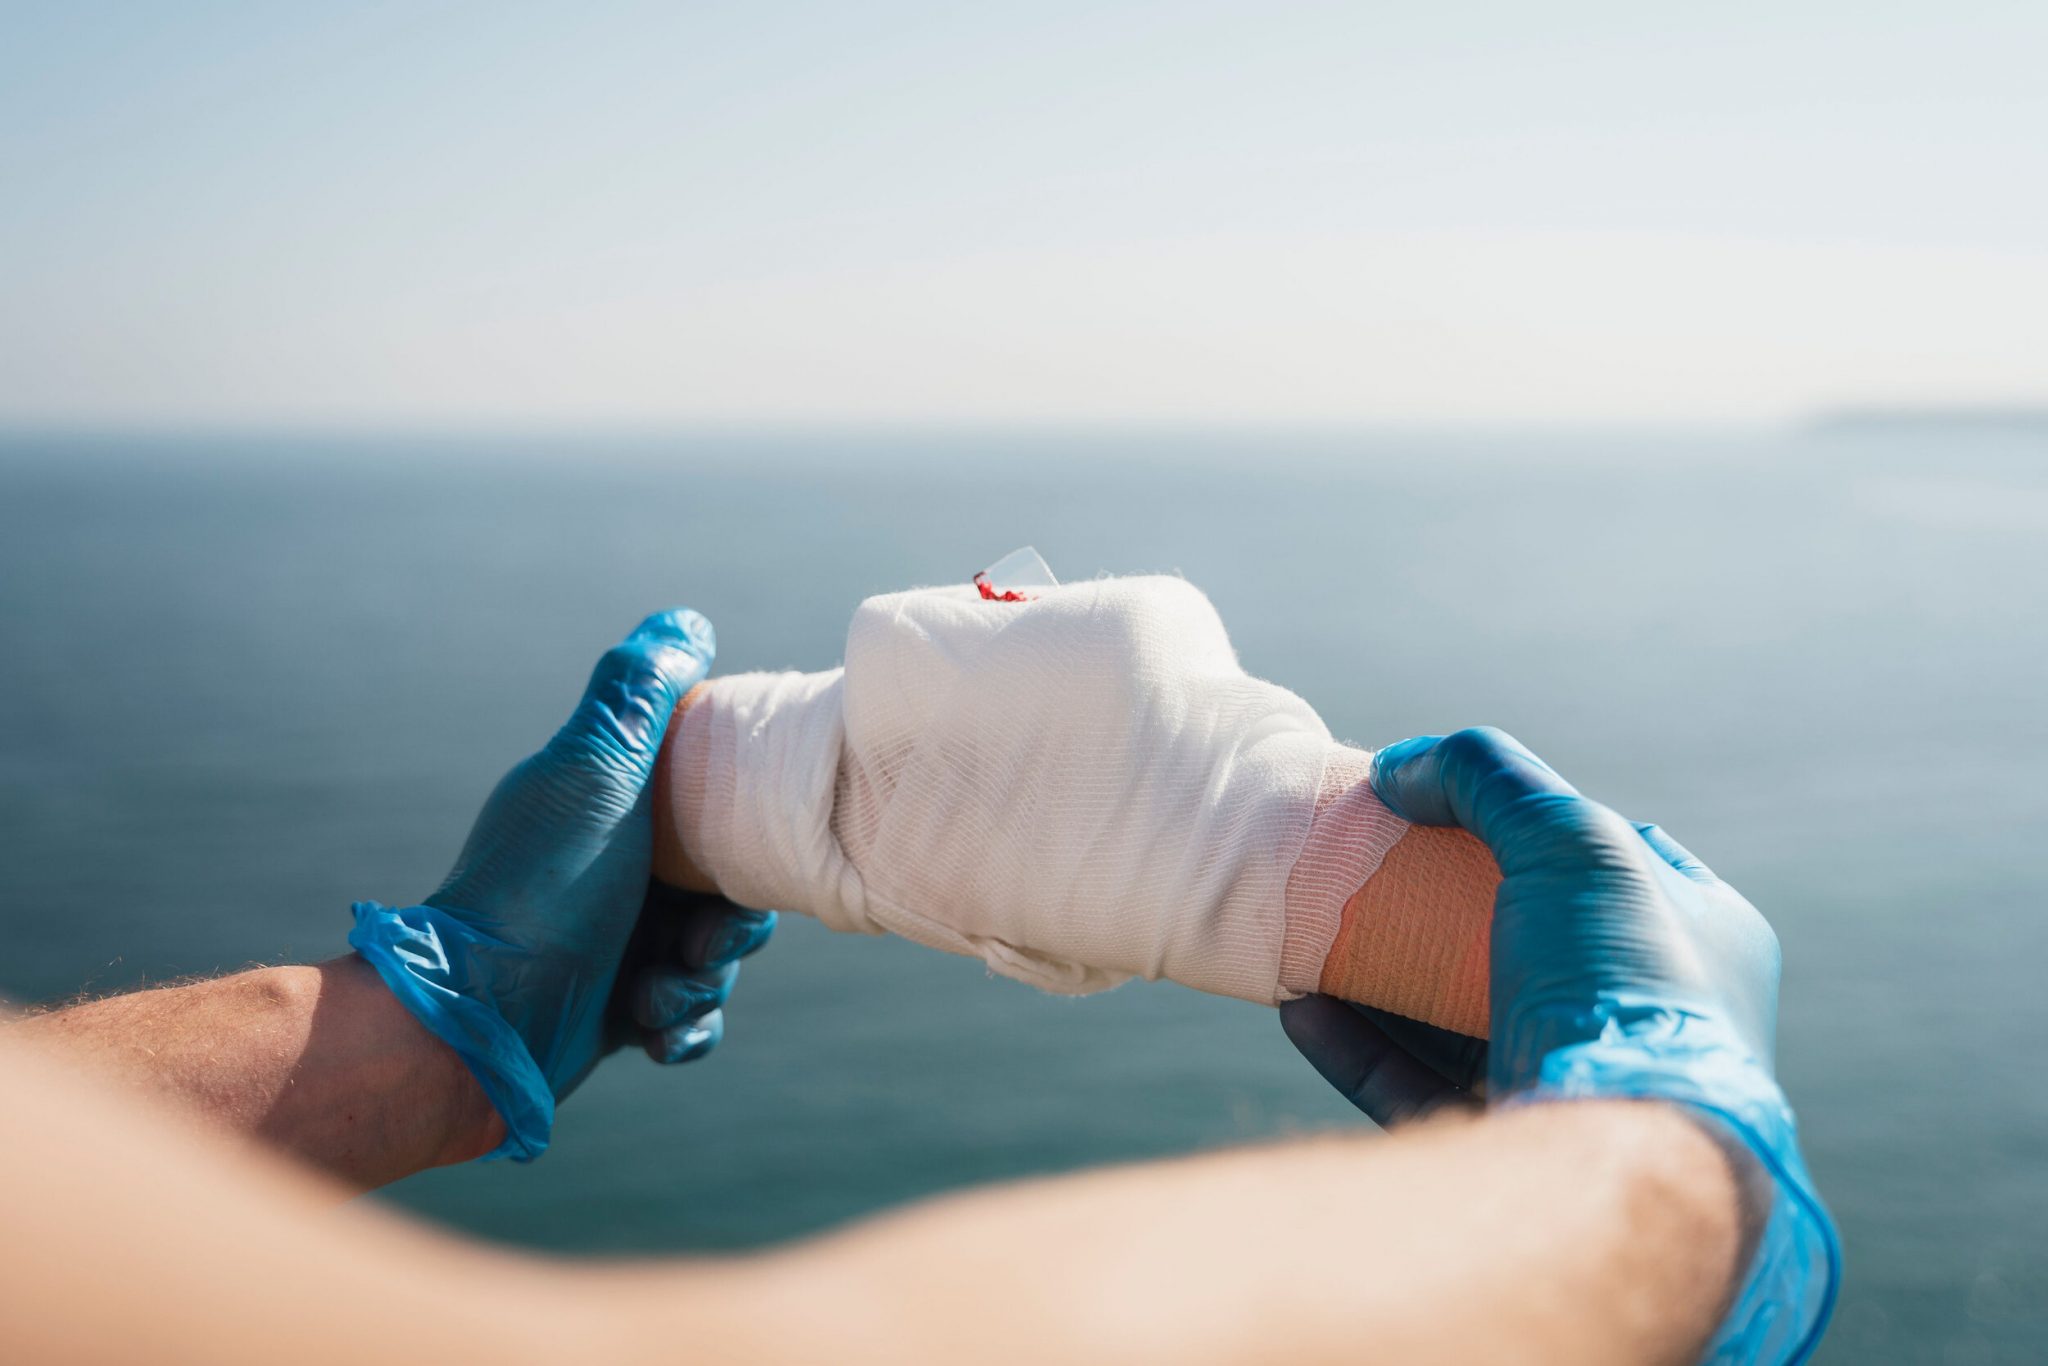 Test your First Aid Knowledge – Wounds & Bleeding